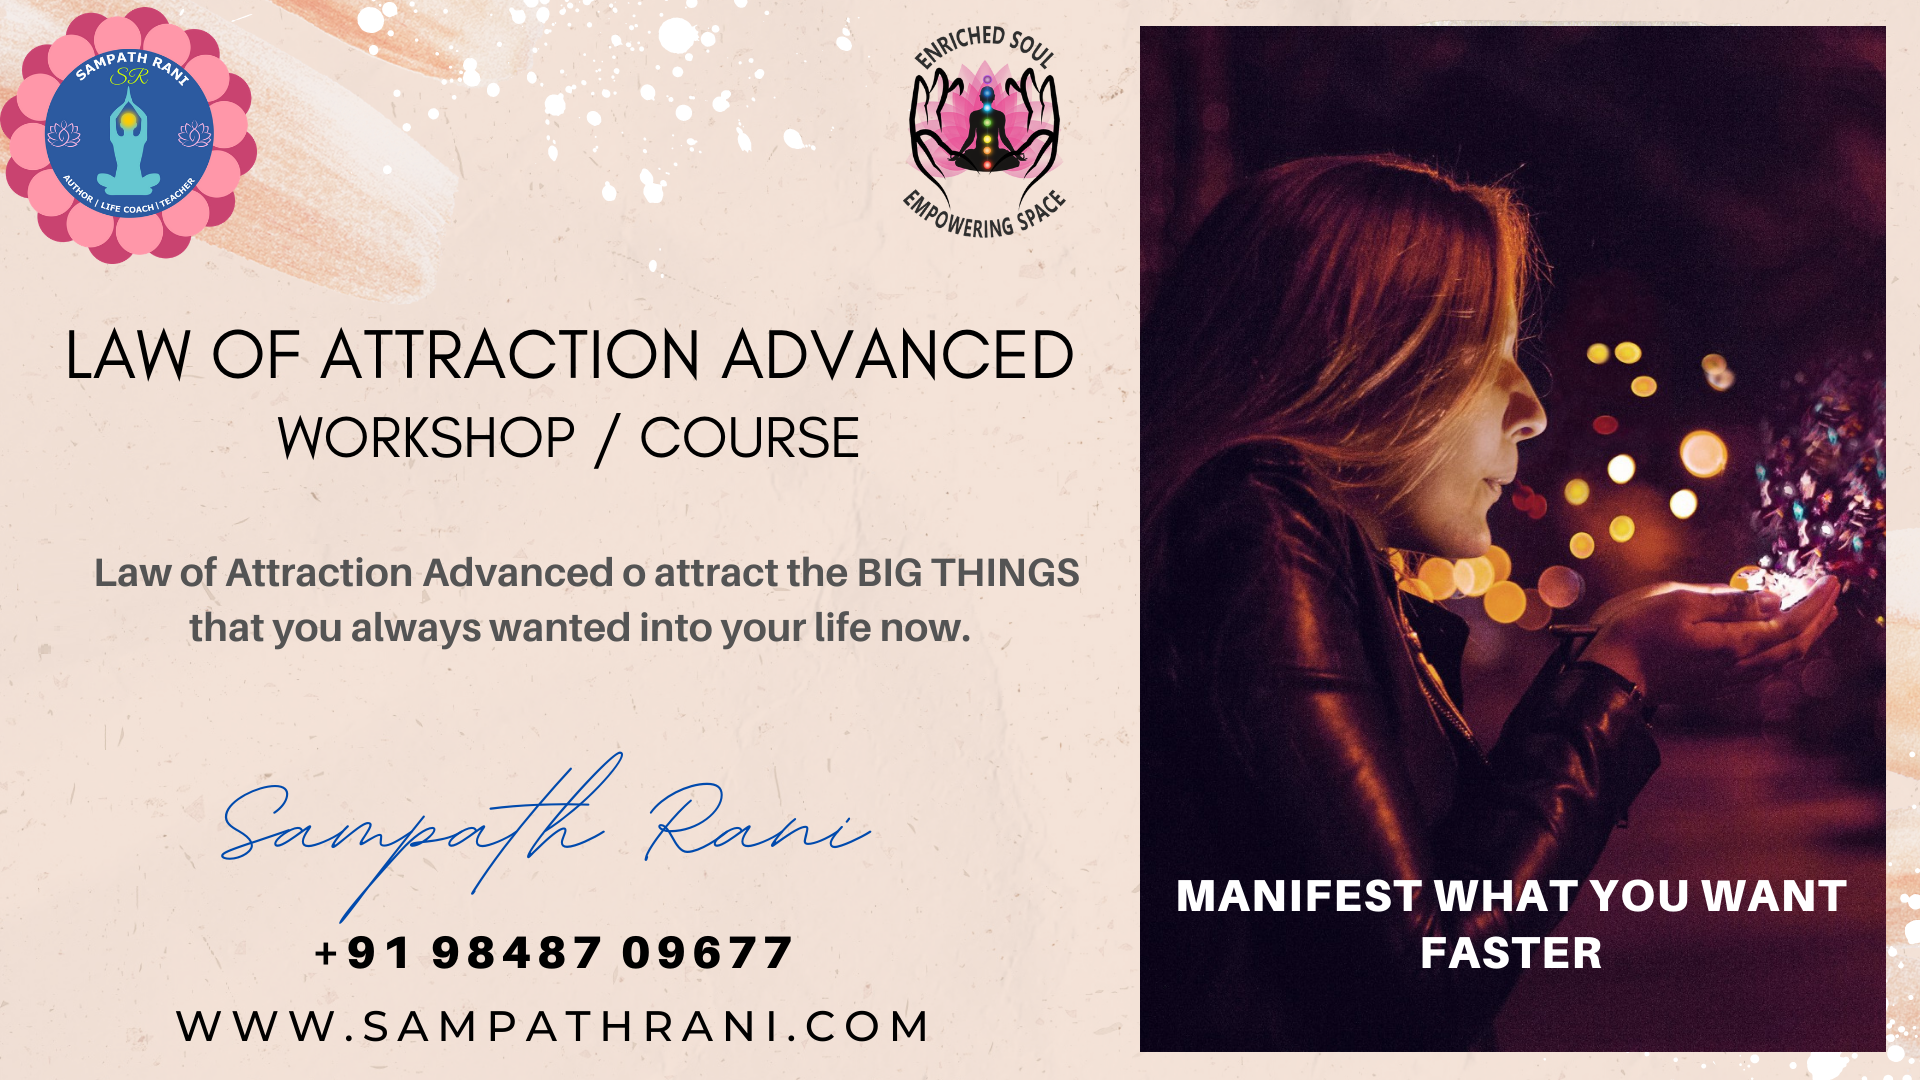 Law of Attraction Advanced Workshop, Course - by Sampath Rani - Washington